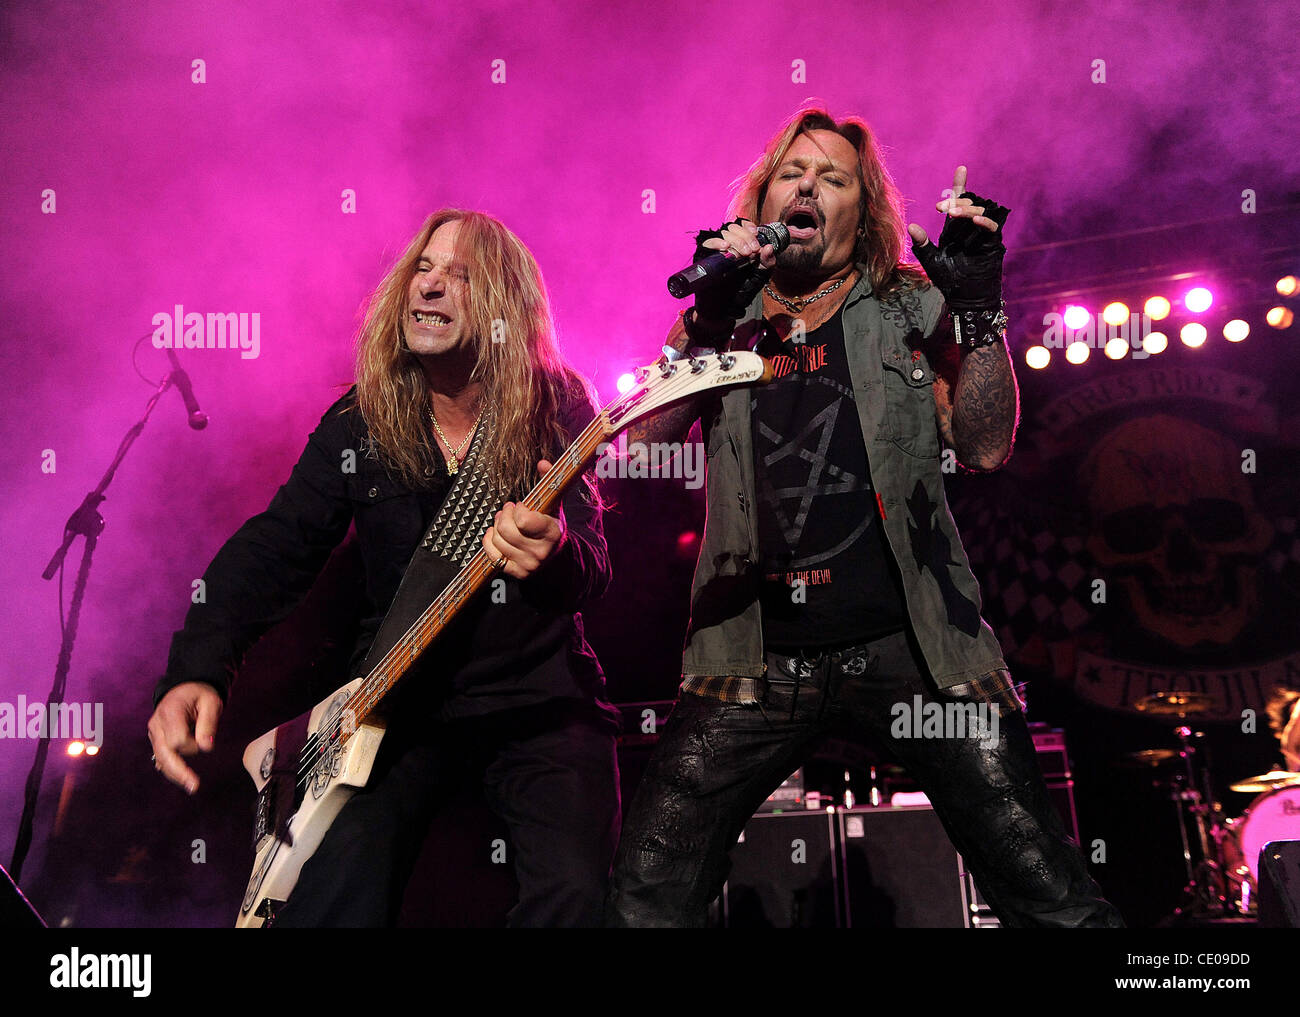 Oct 22, 2011 - Raleigh, North Carolina; USA - (R-L) Singer VINCE NEIL and Bass Guitarist DANA STRUM of the band Slaughter performs as Vince Neil's 2011 Solo Tour makes of stop at the Raleigh Amphitheatre.  Copyright 2011 Jason Moore. (Credit Image: © Jason Moore/ZUMAPRESS.com) Stock Photo